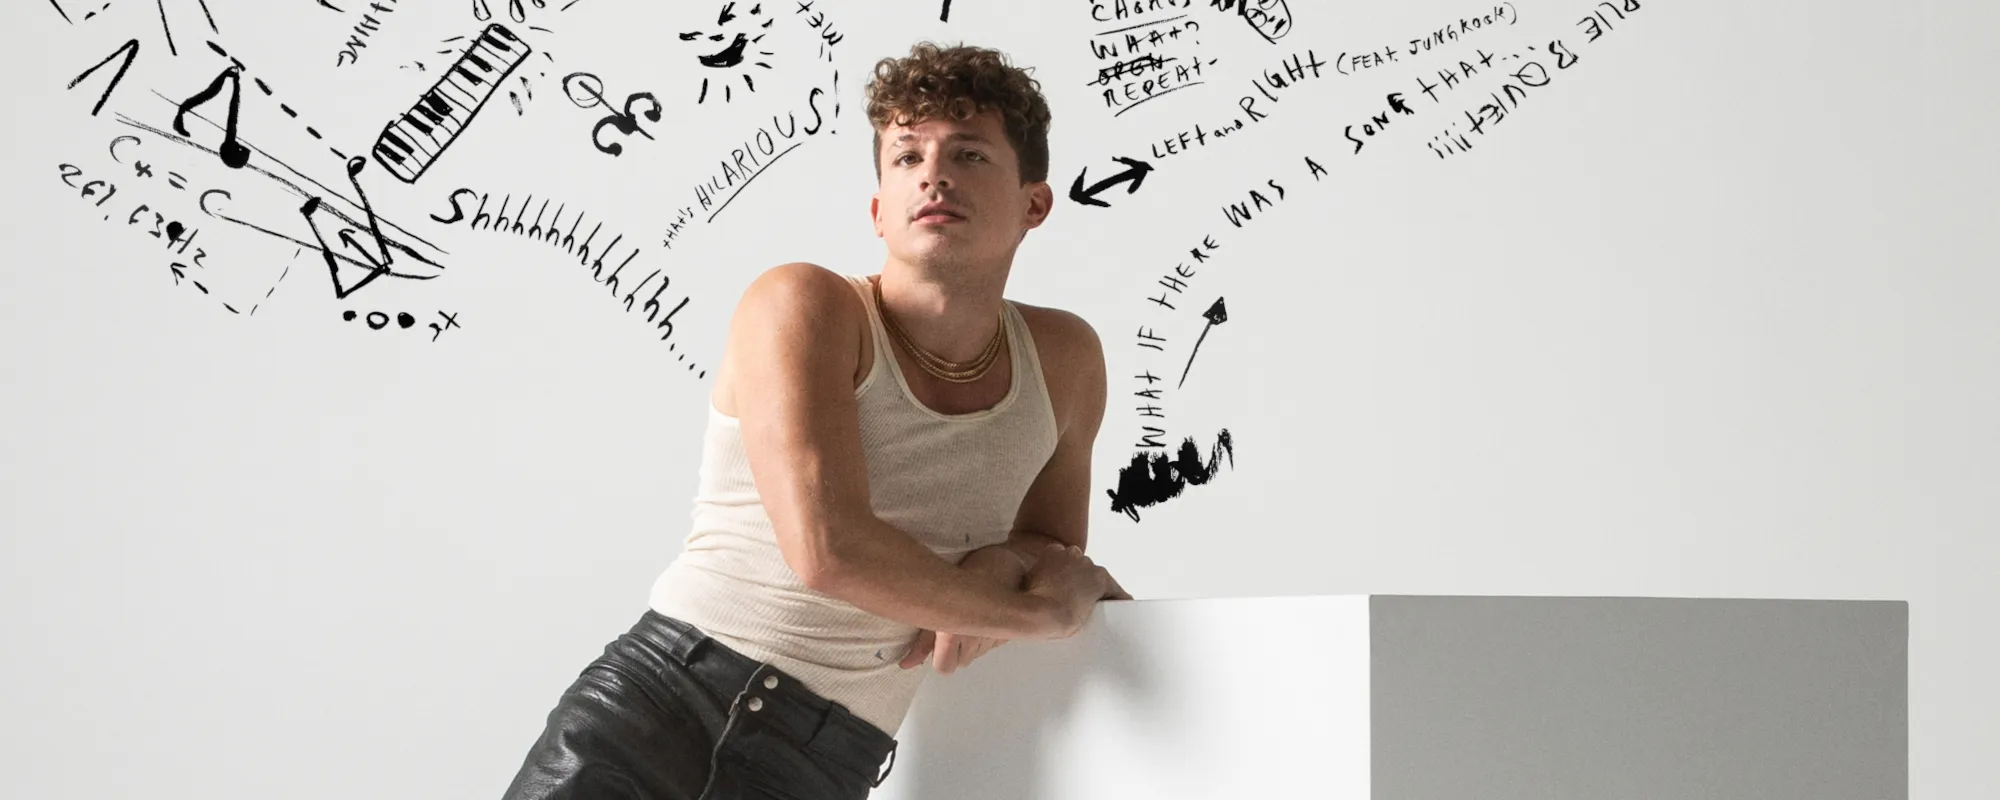 New Song Saturday! Hear New Tracks From Charlie Puth, Arctic Monkeys, Joss Stone, a-ha, and More